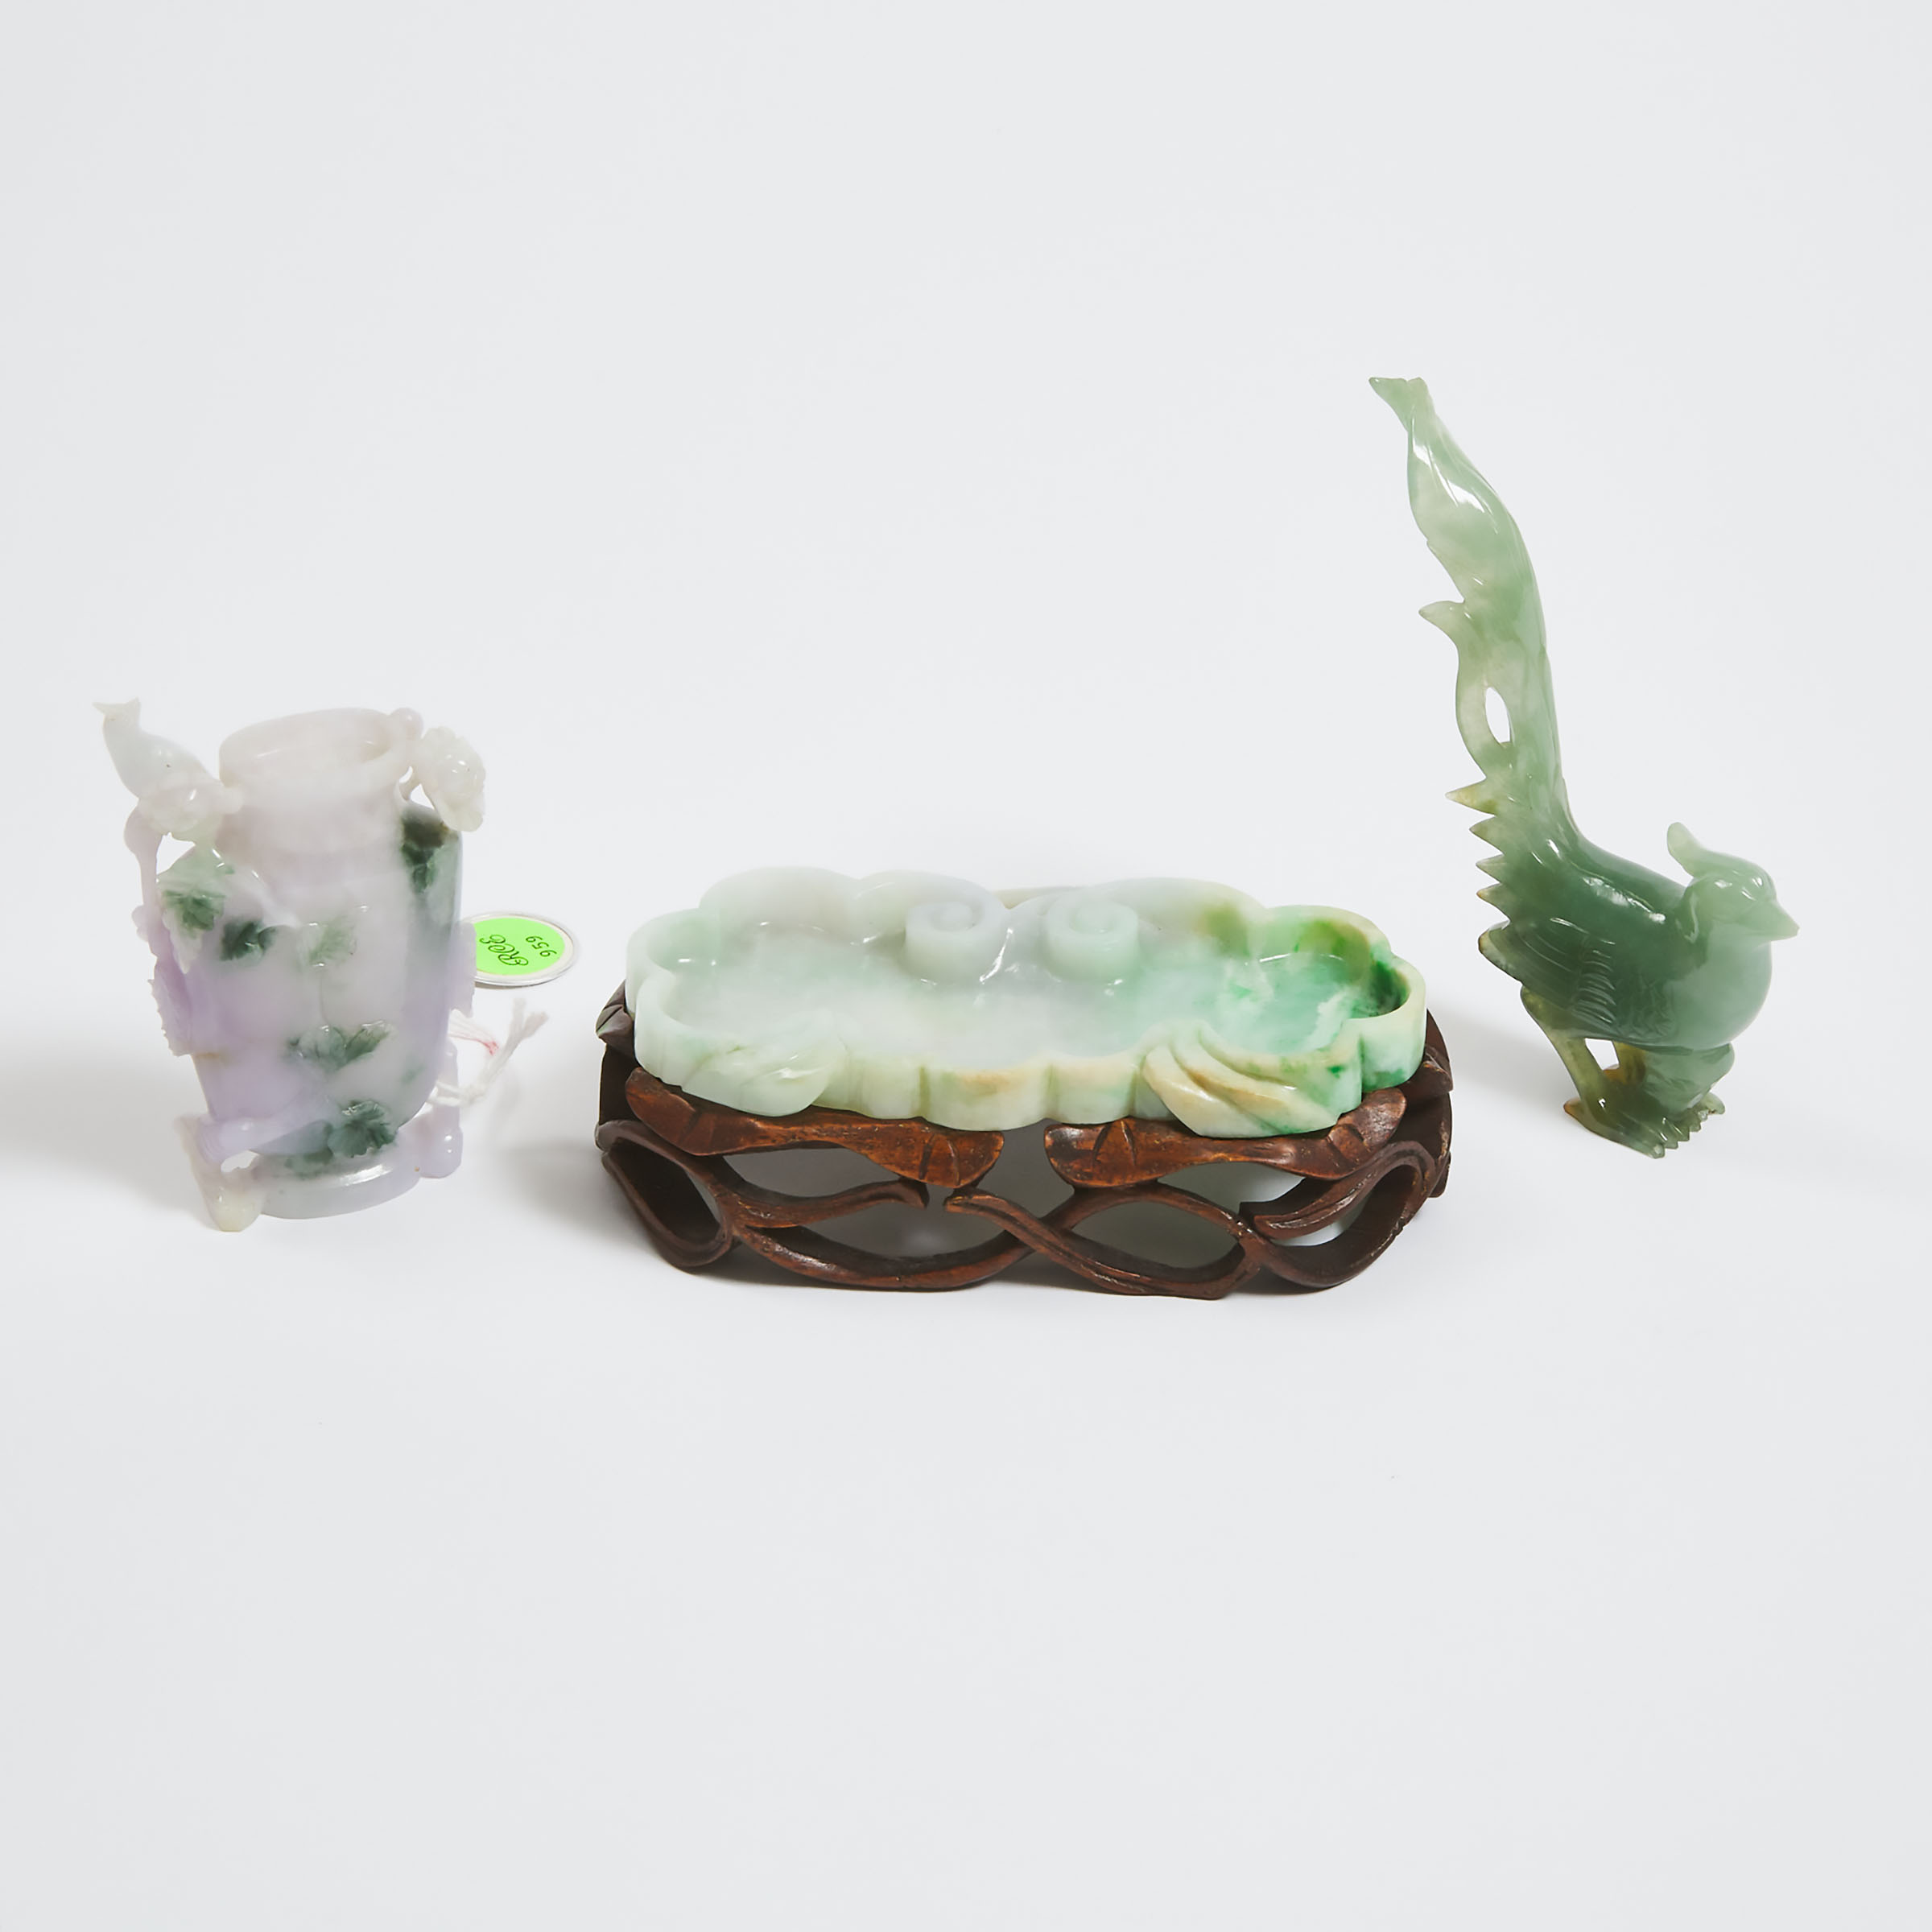 A Group of Three Jadeite Carvings, Qing Dynasty 